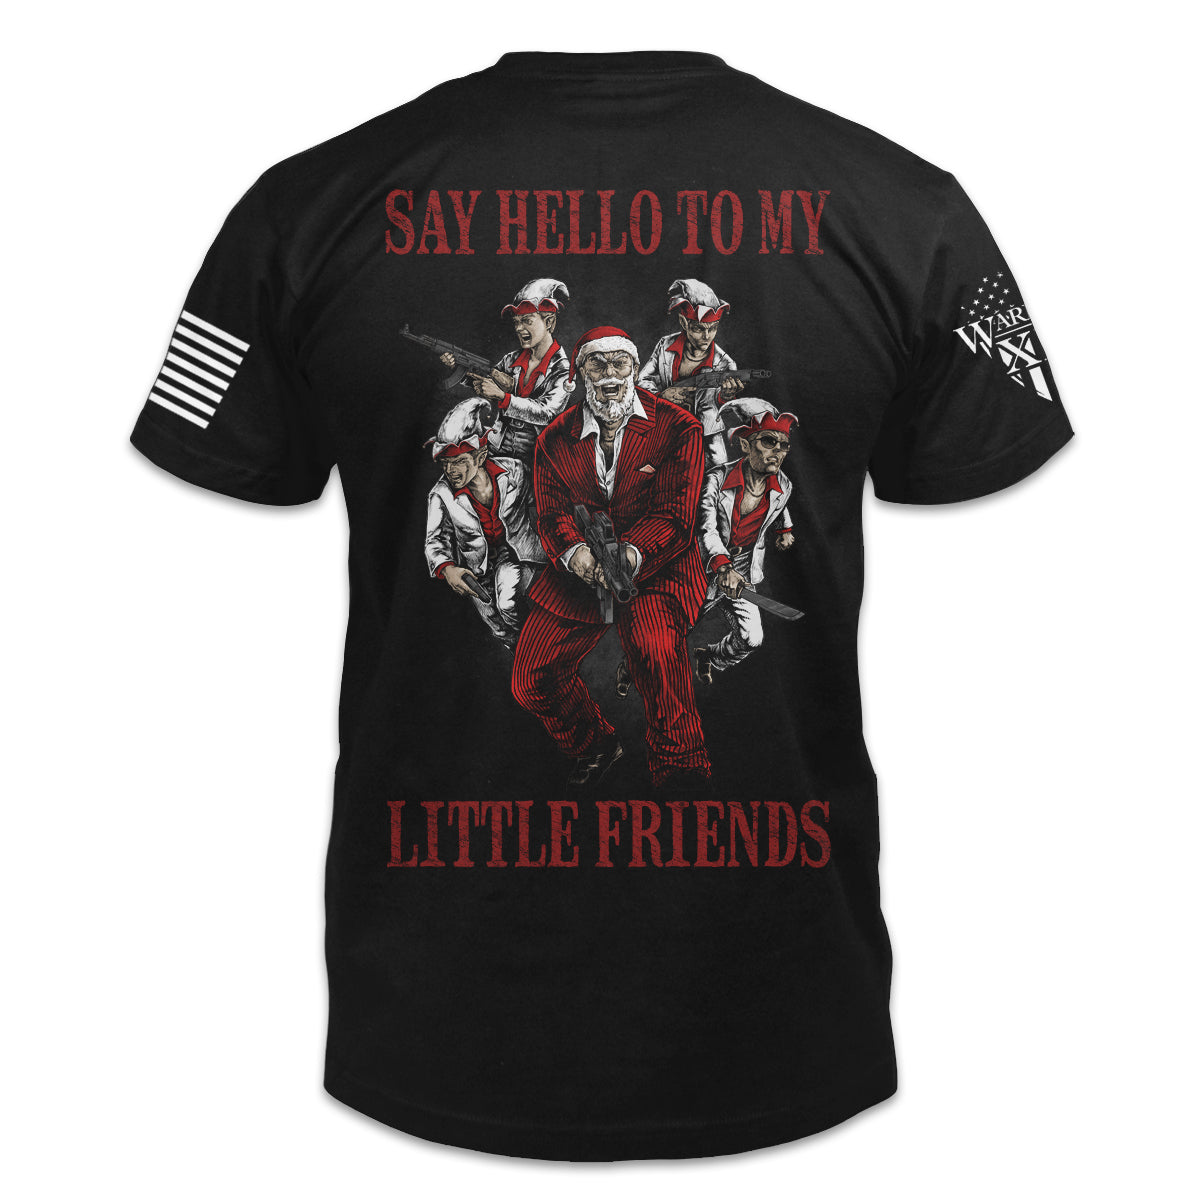 The back of "Say Hello To My Little Friends" featuring the main design of, Four elves and Santa in a tuxedo with AK-47s and AR-15s with the saying say hello to my little friends.